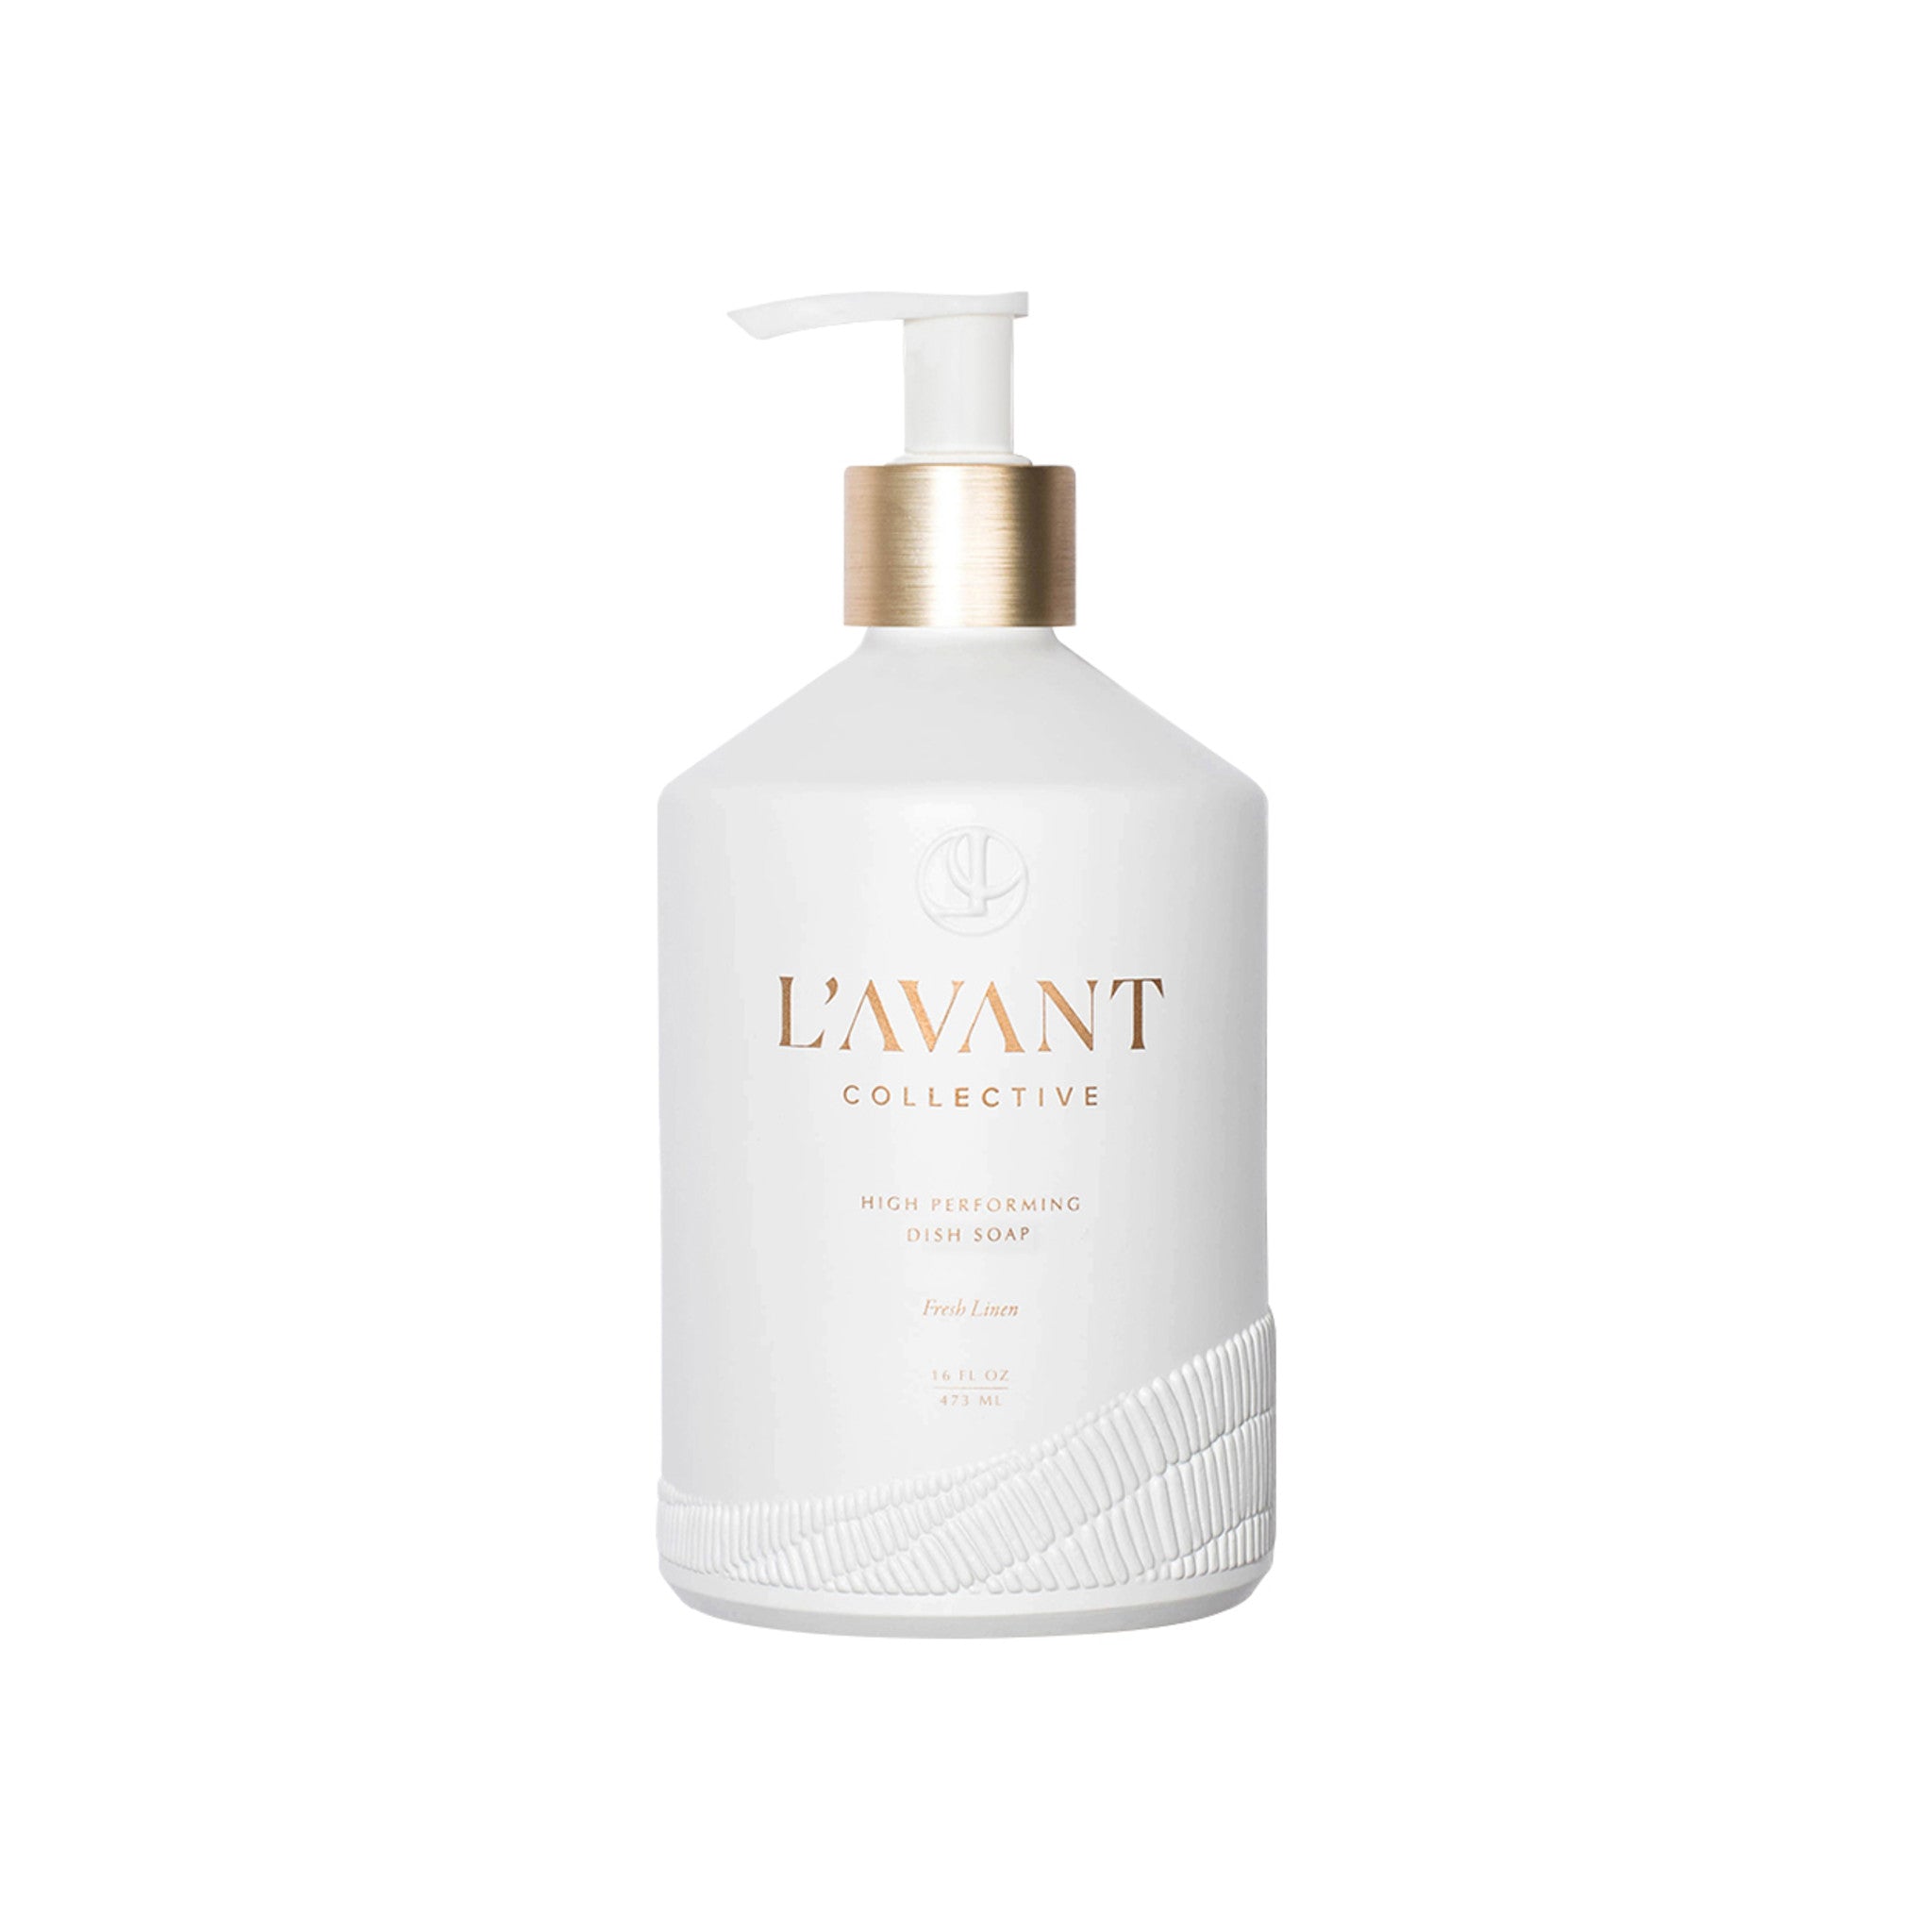 L’Avant Collective Fresh Linen High Performing Dish Soap Size variant: 16 oz main image.